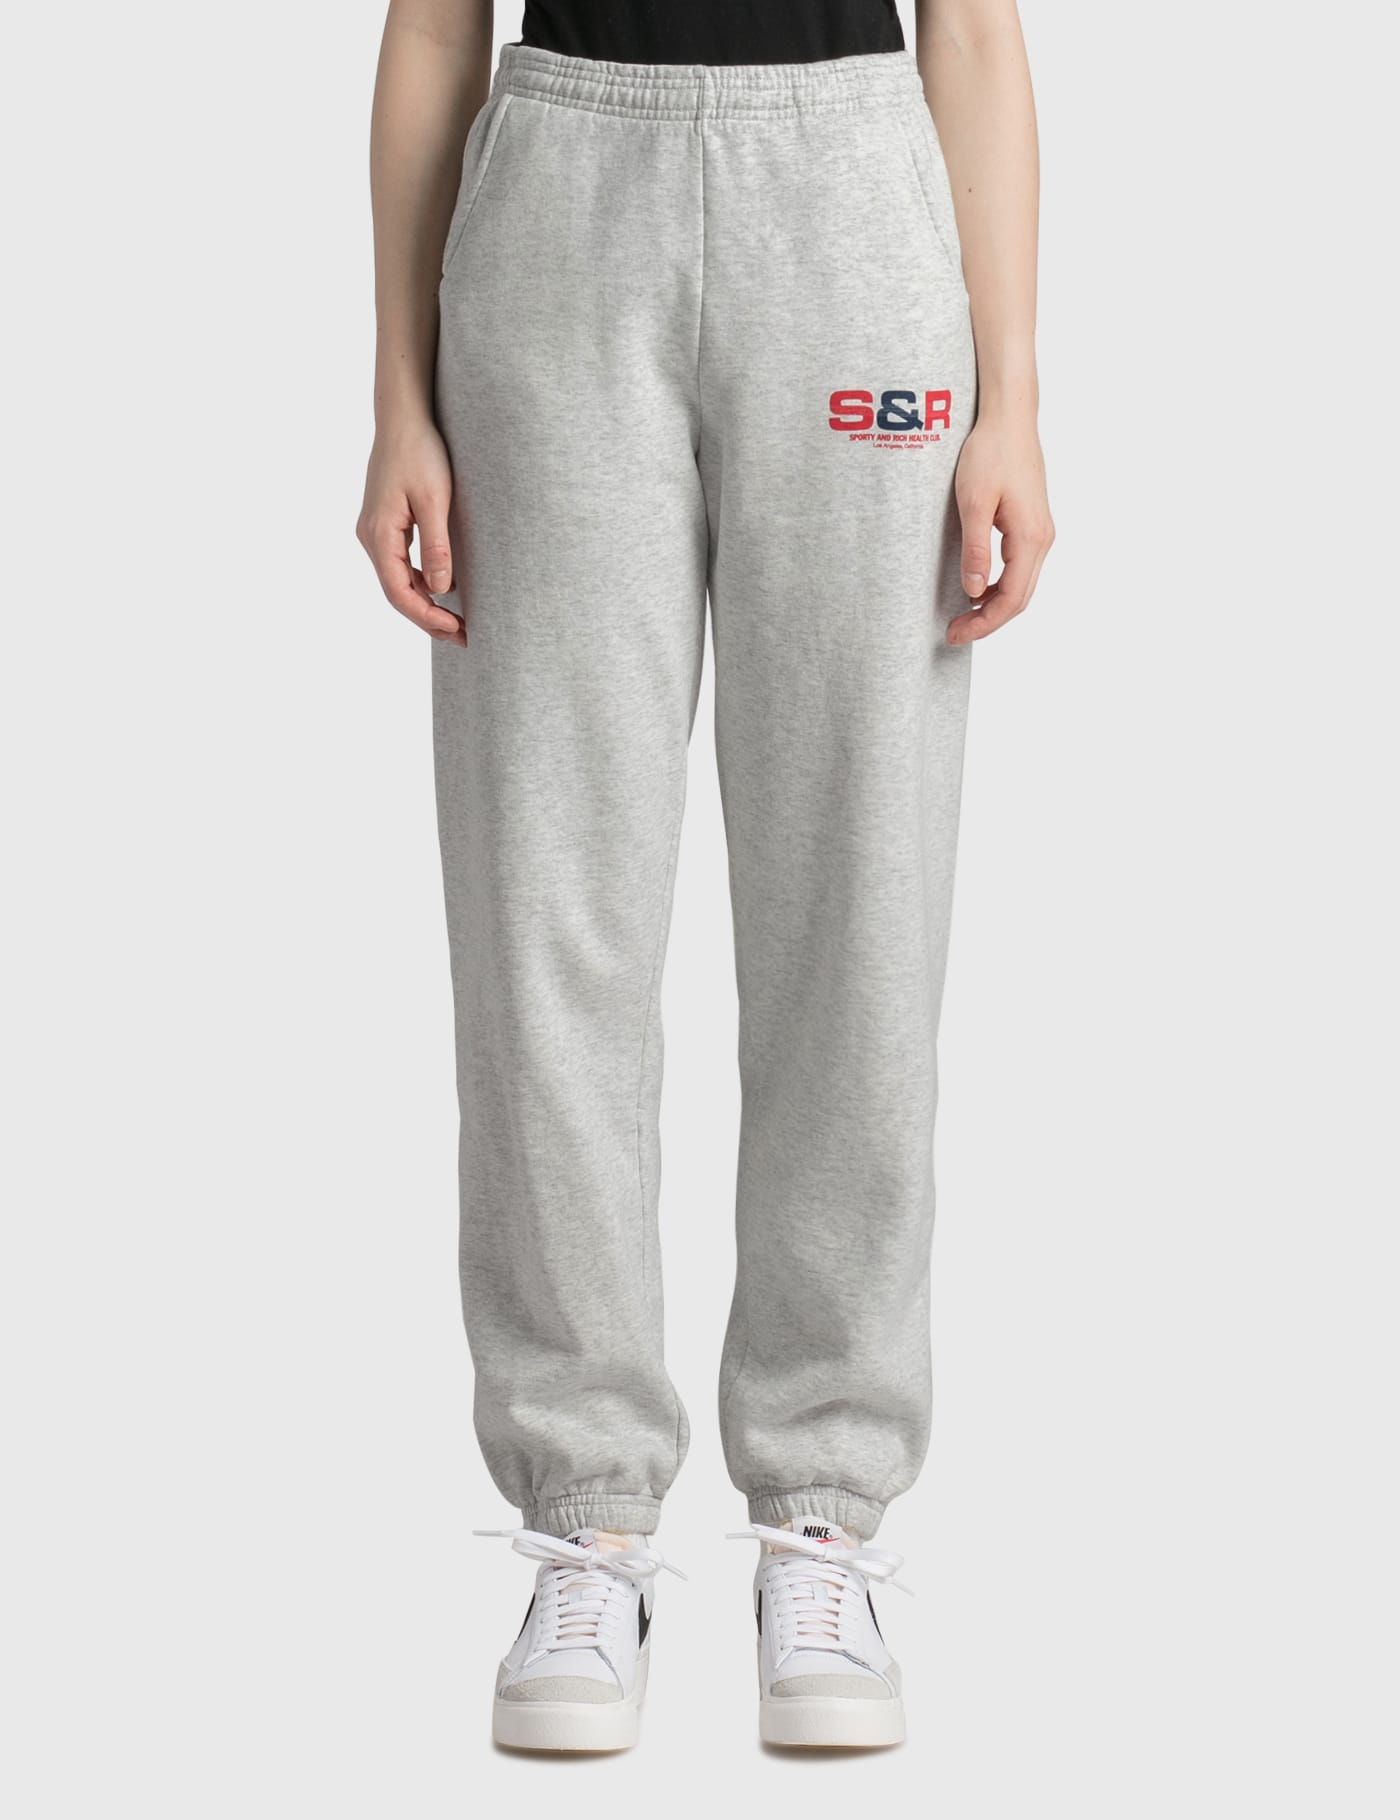 Sporty & Rich - Health Club Sweatpants | HBX - Globally Curated Fashion and  Lifestyle by Hypebeast